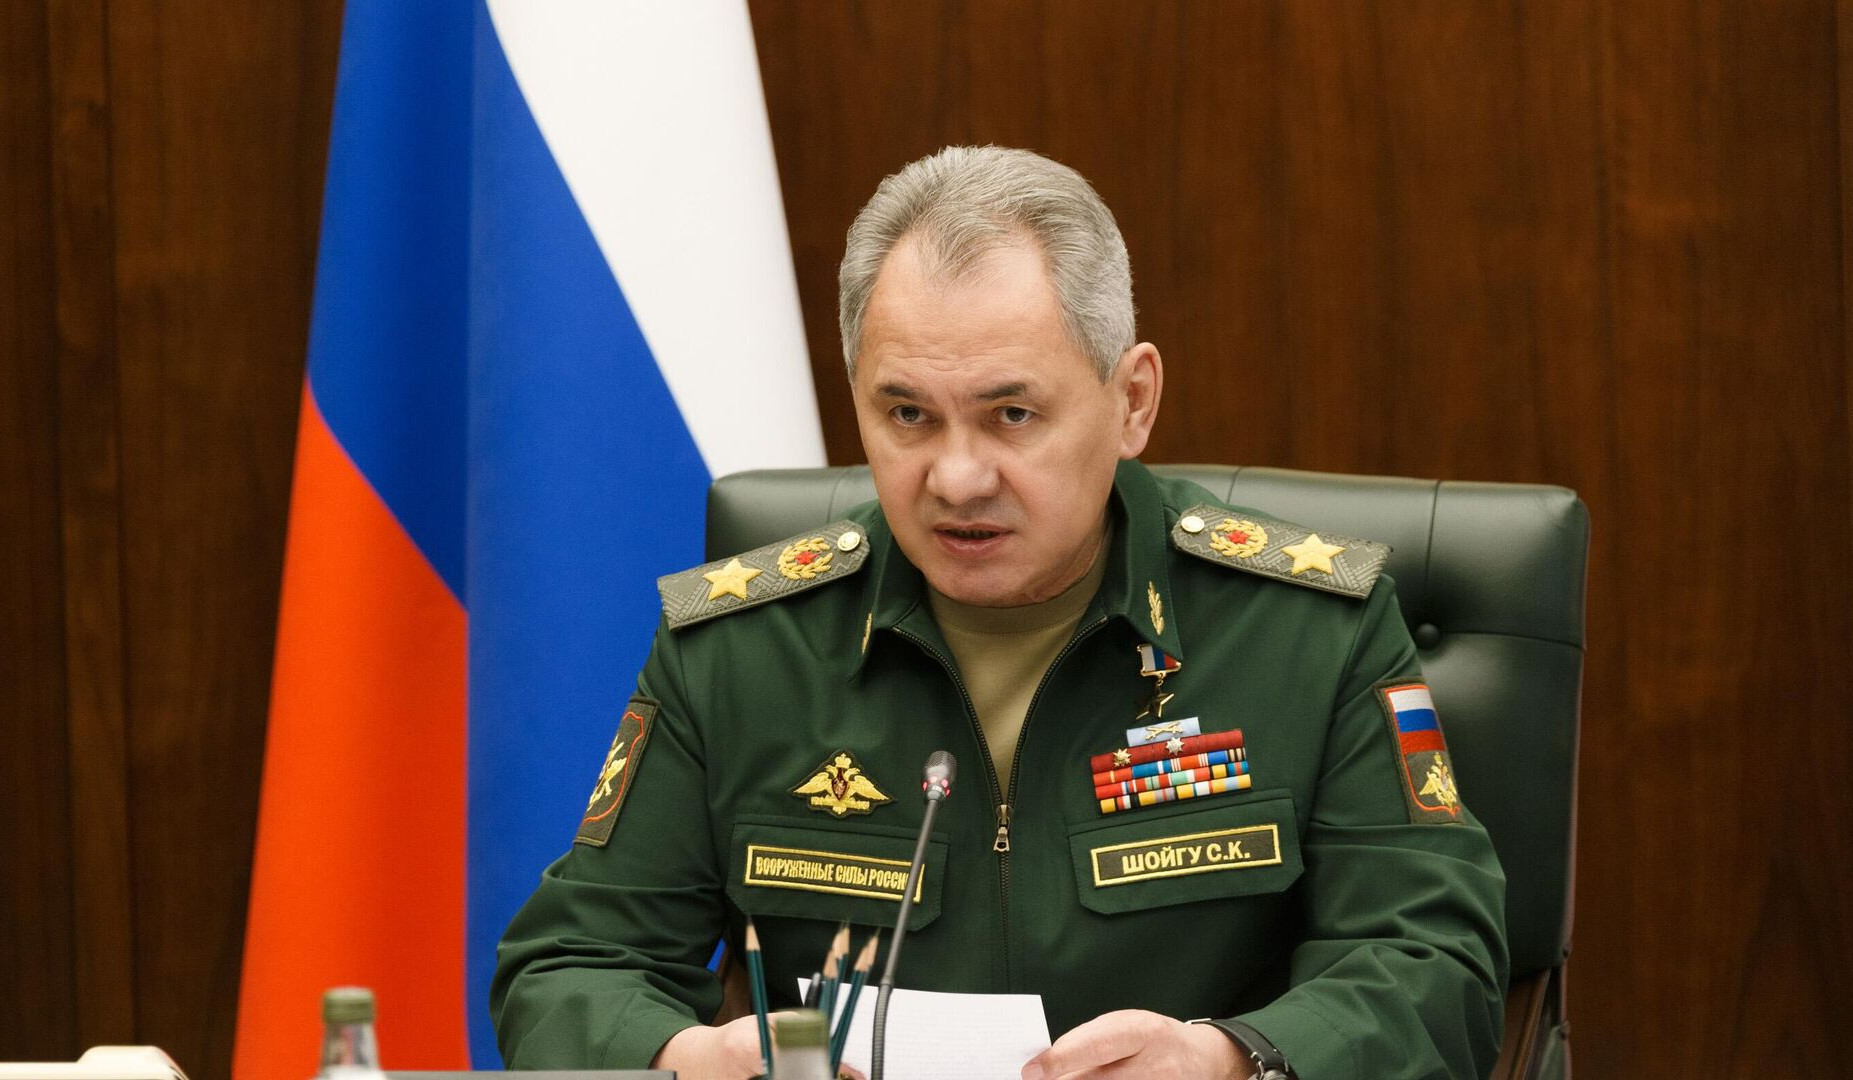 Over 200,000 reservists join Russian troops in partial mobilization: Shoigu